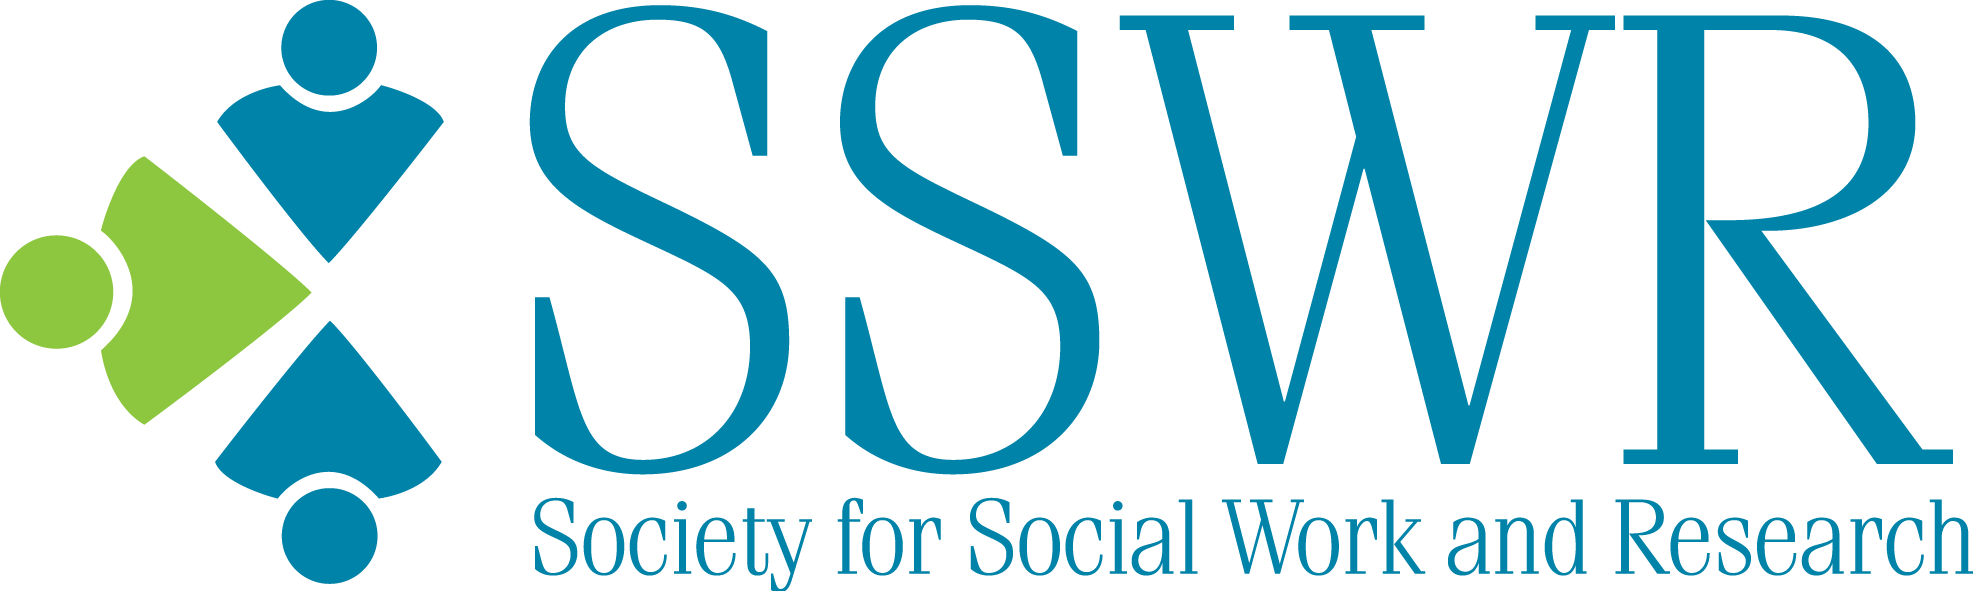 SSWR — Society for Social Work and Research